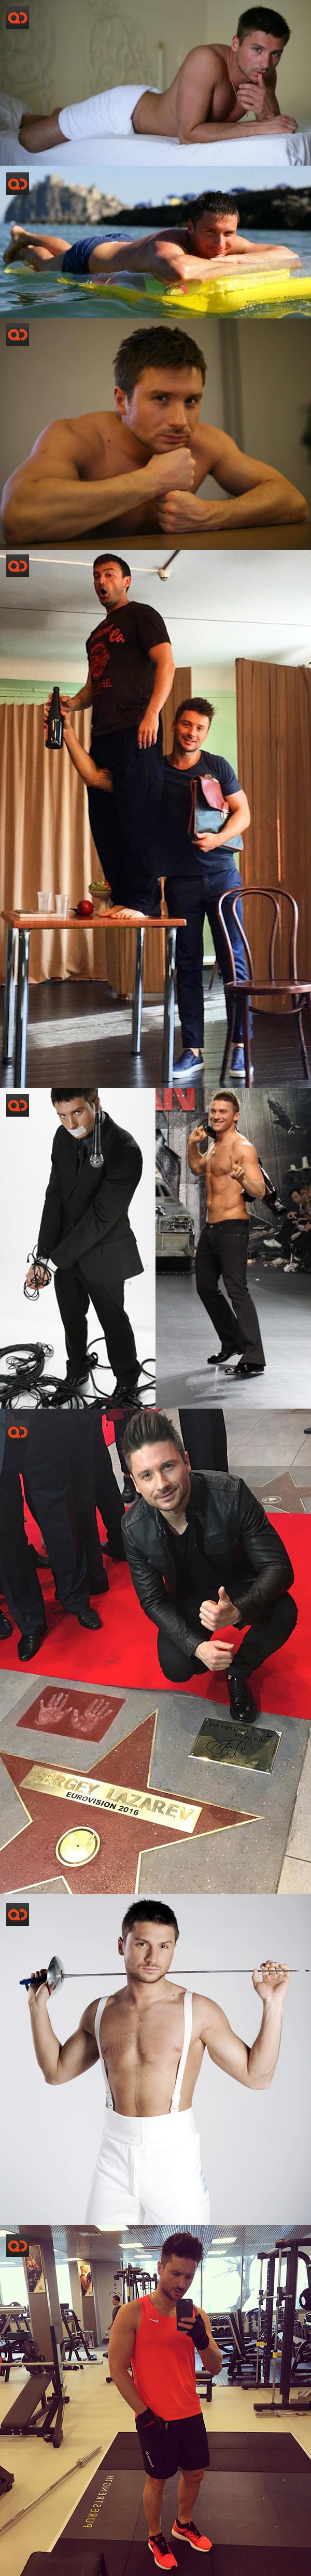 qc-exposed_sergey_lazarev_russia_eurovision_contestant_naked_butt_surfaces_online-collage02